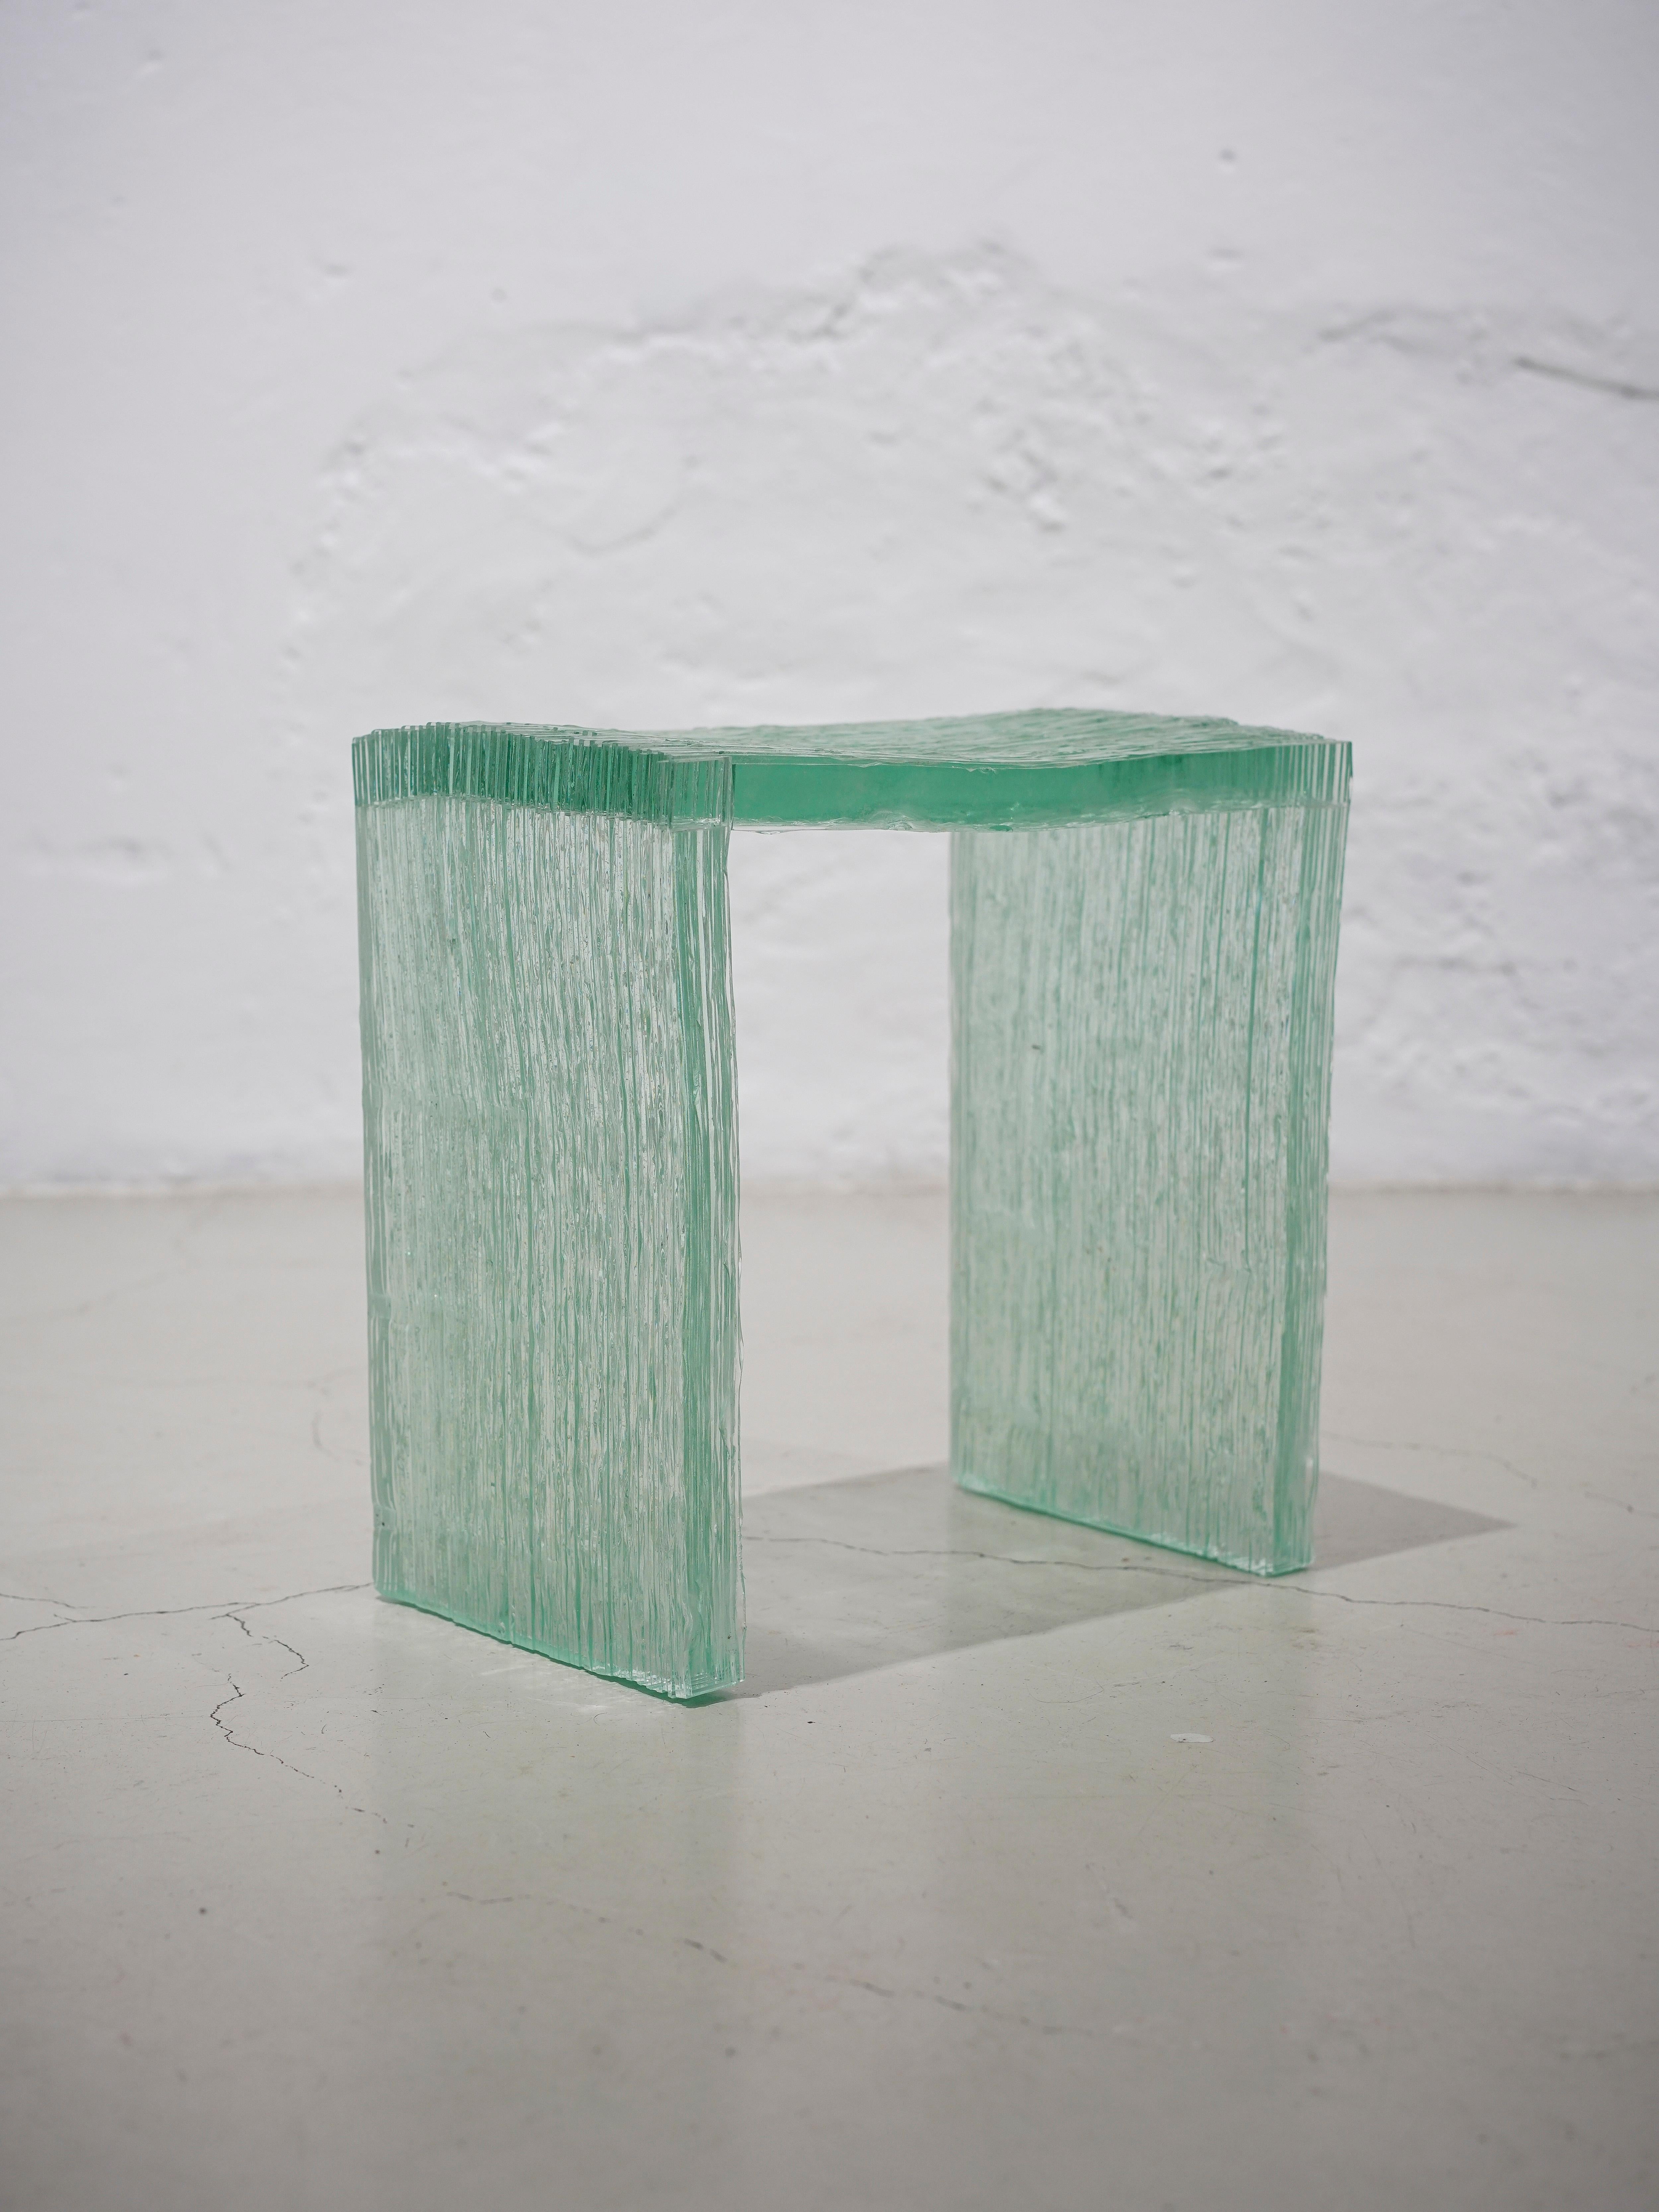 Bruch glass stool by Anima Ona
Dimensions: D 40 x W 40 x H 40 cm
Materials: glass

Bruch is made out of sheet glass which has been broken into stripes and melted together again.

anima ona is a design studio established in 2018 by Freia